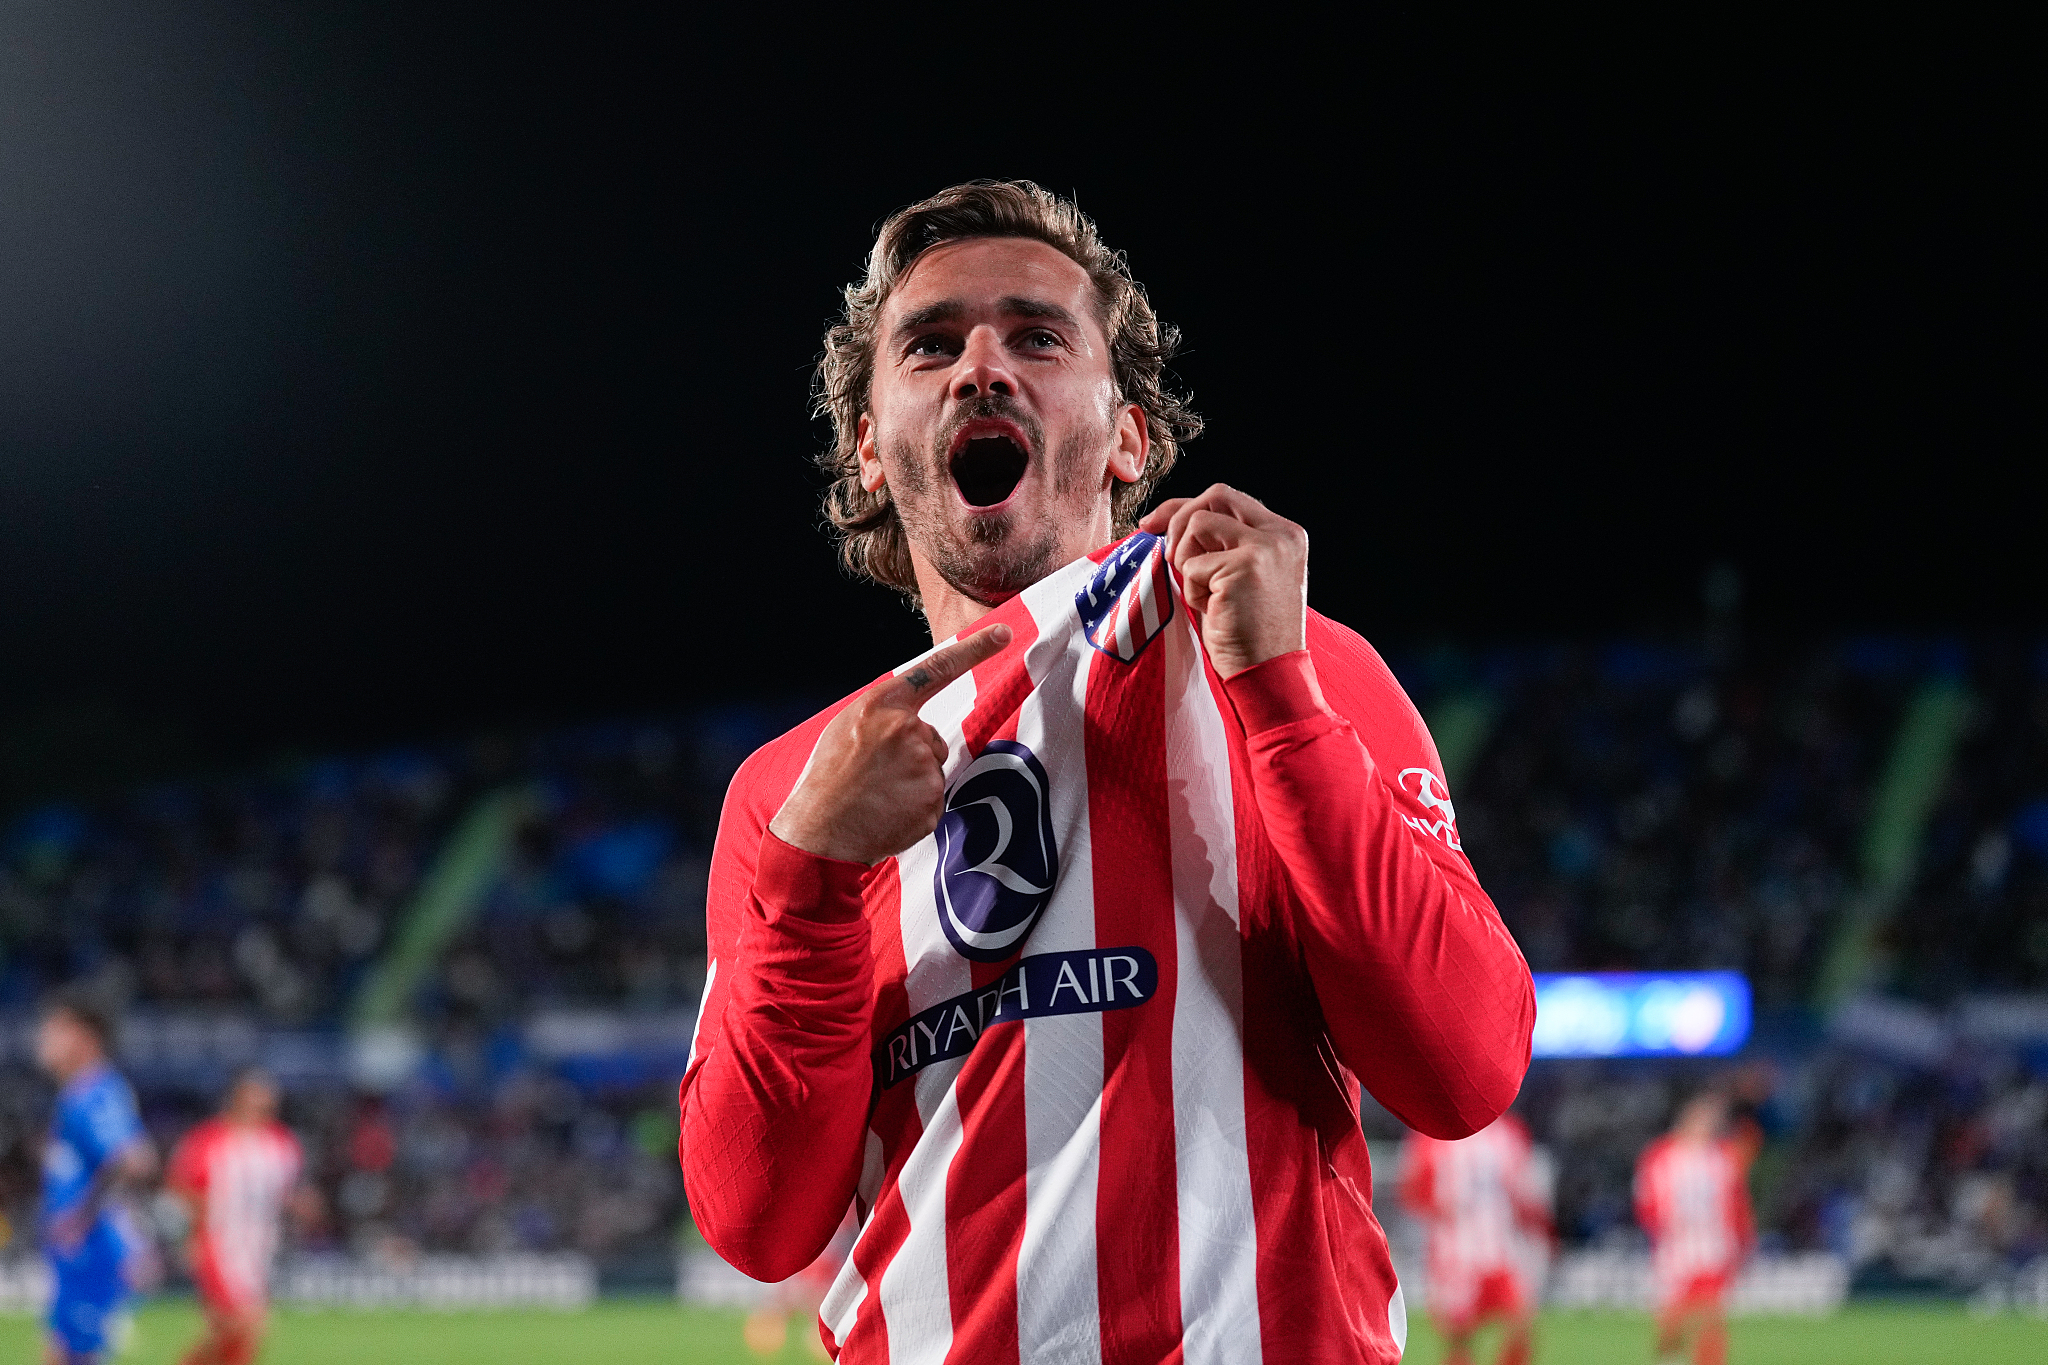 Antoine Griezmann of Atletico Madrid points to the team's logo on his jersey after scoring a hat-trick against Getafe CF during their La Liga match in Getafe, Spain, May 15, 2024. /CFP